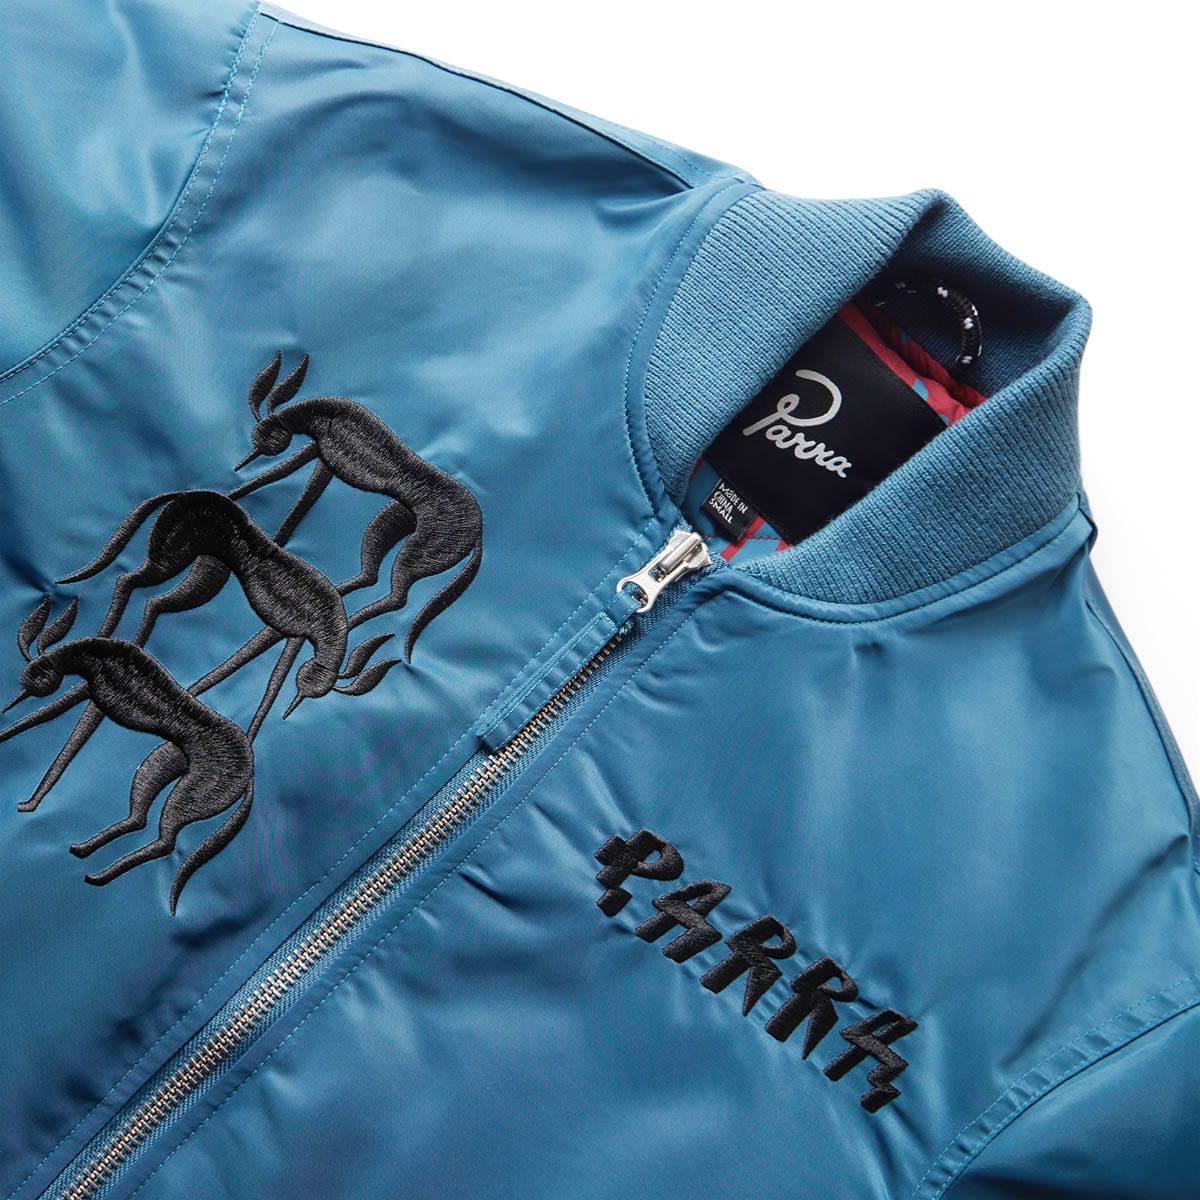 By Parra Outerwear STACKED PETS VARSITY JACKET